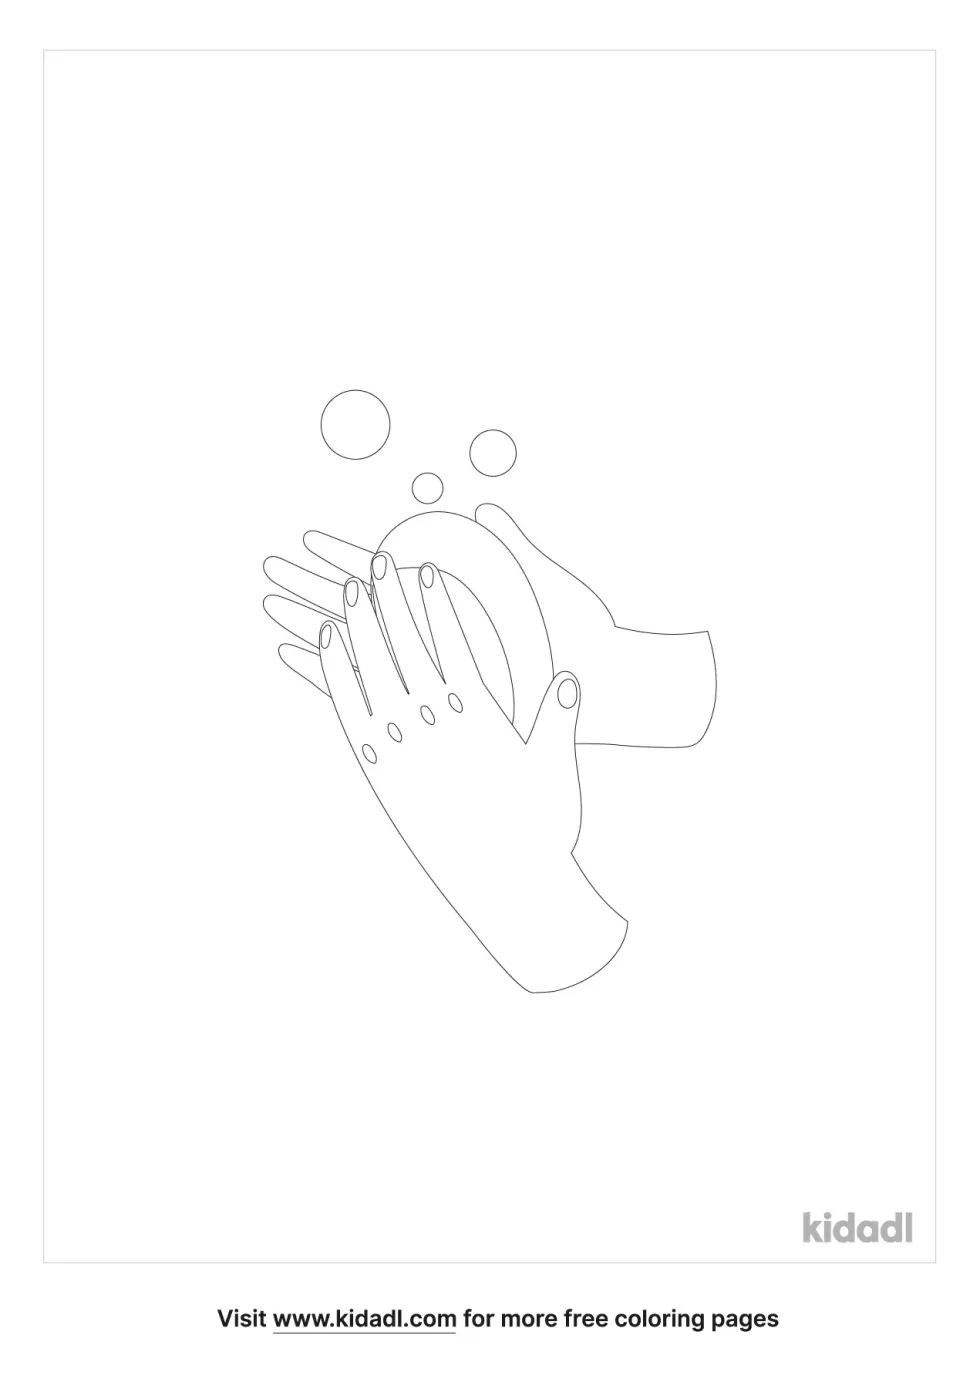 Hand Soap Coloring Page